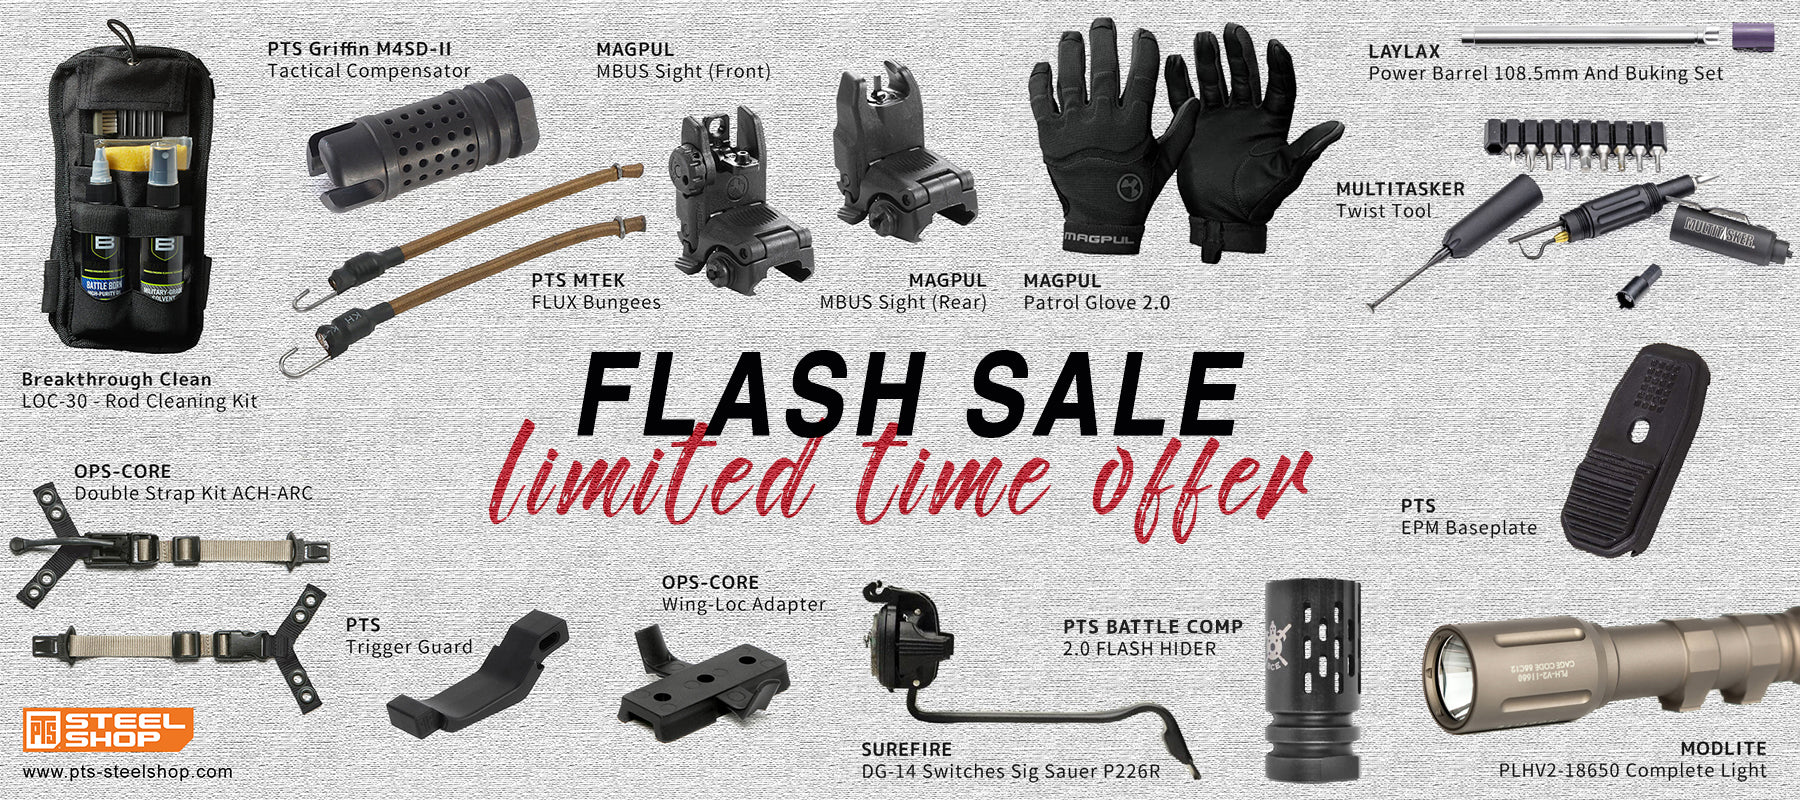 Up to 60% OFF Flash Sale is now on!